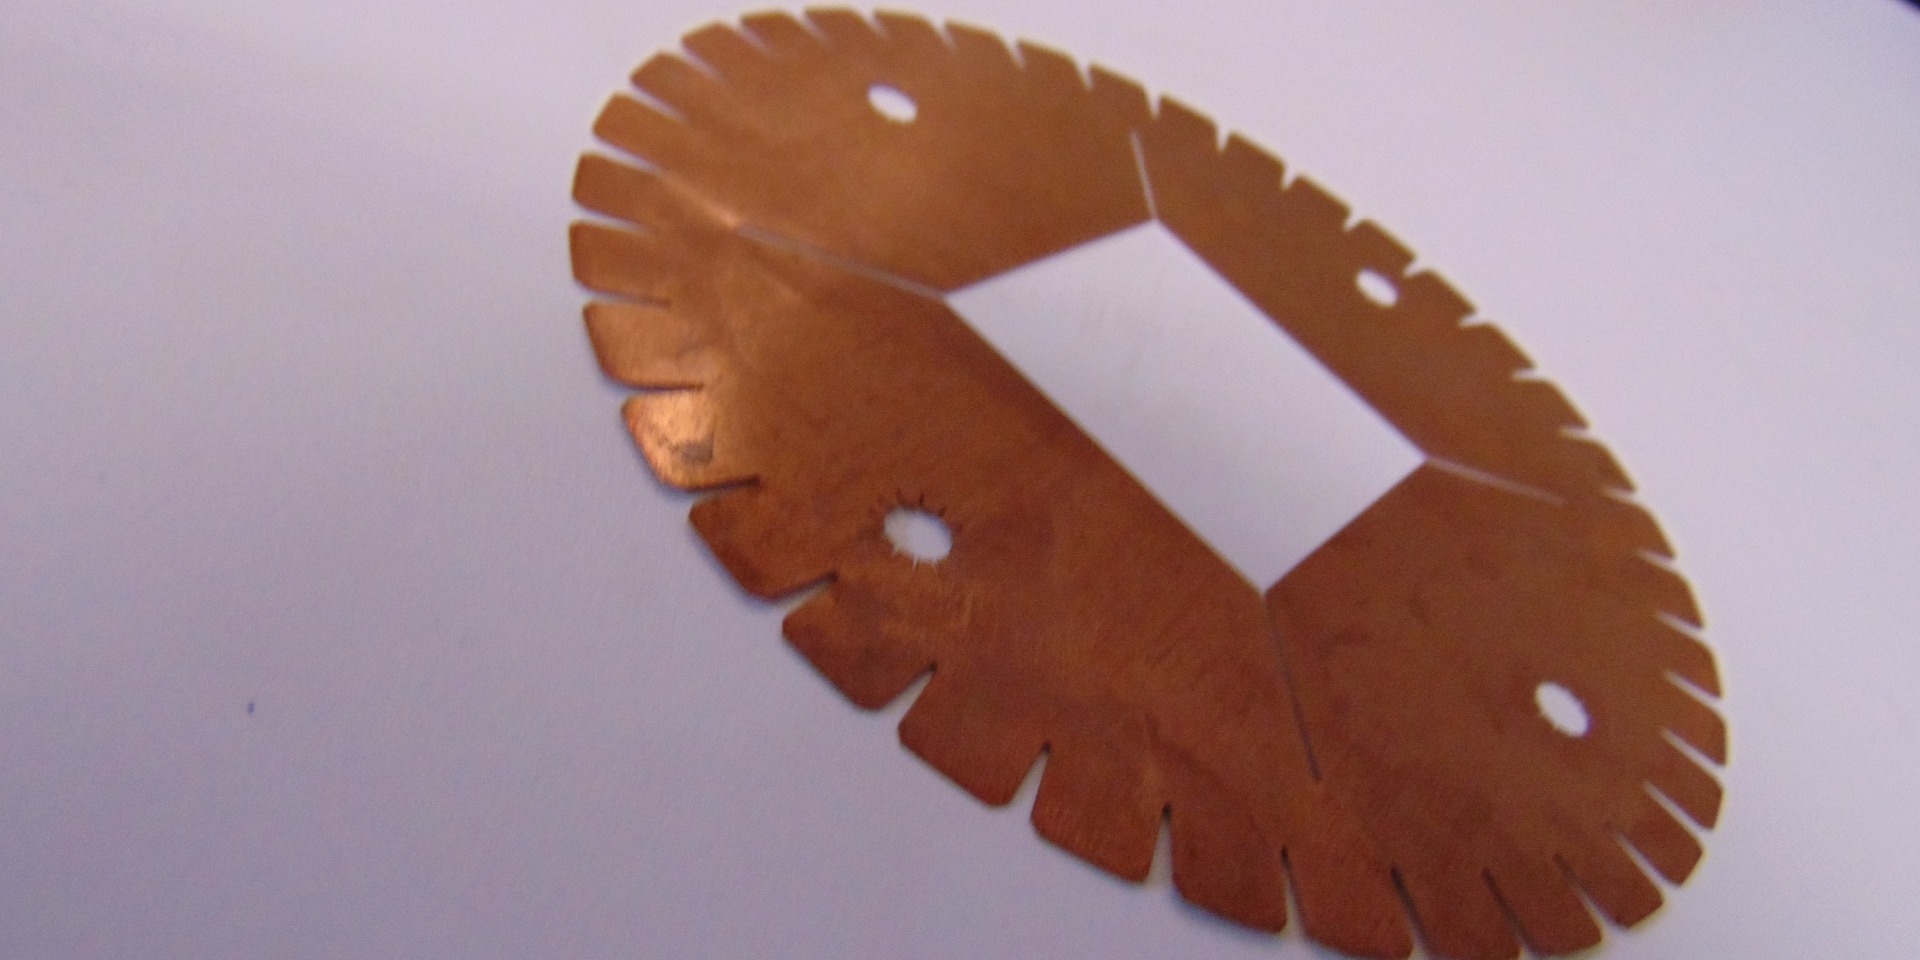 Etch Tech Manufacture Highly Durable, Precision Shims and Washers using the photo chemical etching process